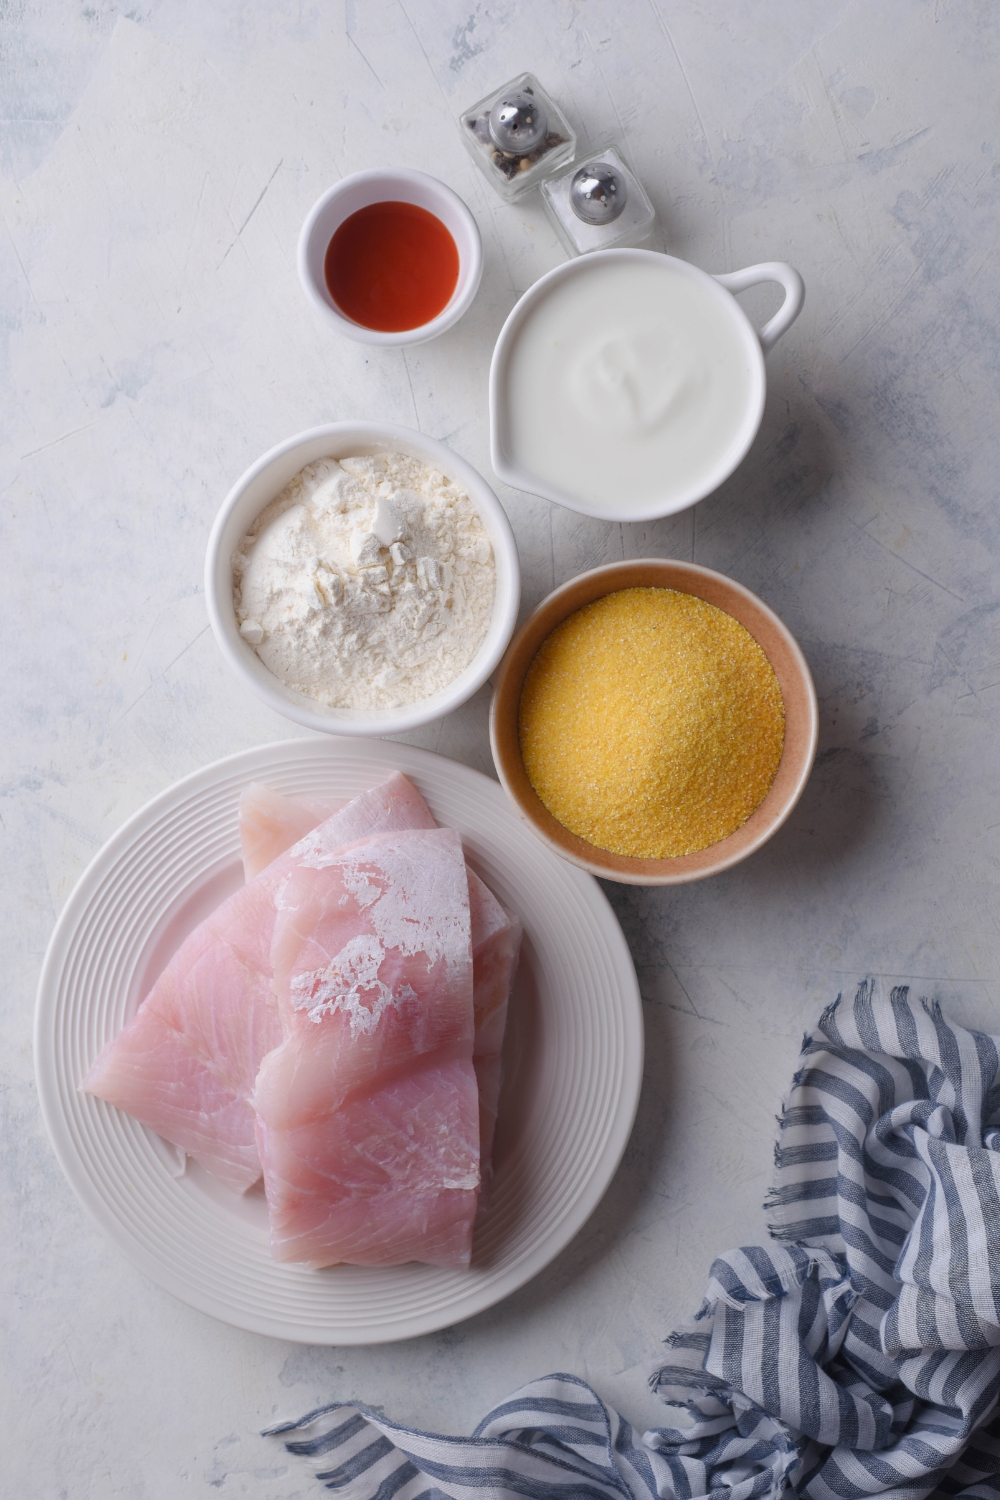 An assortment of ingredients including a plate of raw grouper and bowls of cornmeal, flour, buttermilk, and spices.